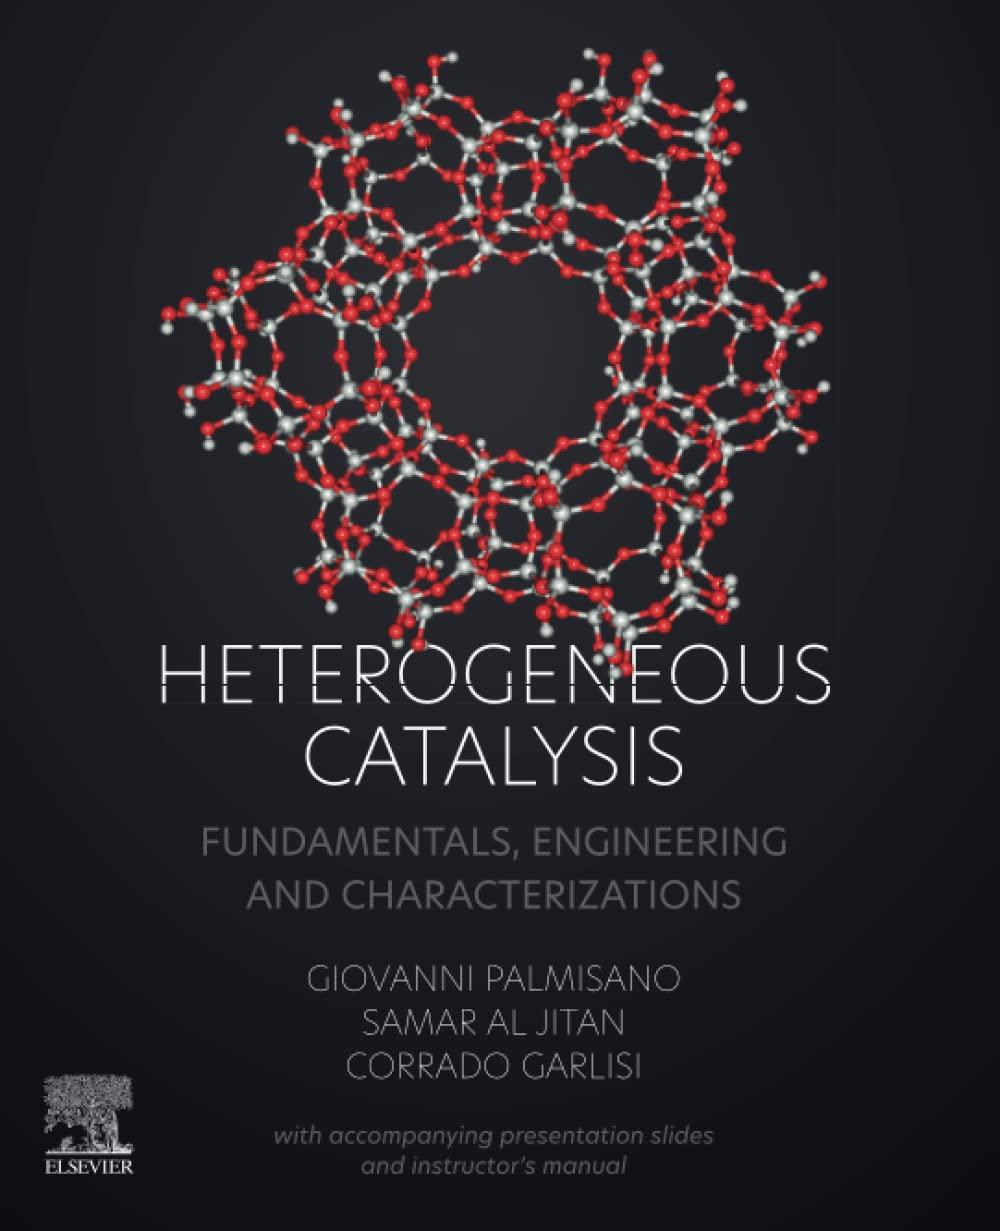 heterogeneous catalysis fundamentals engineering and characterizations with accompanying presentation slides